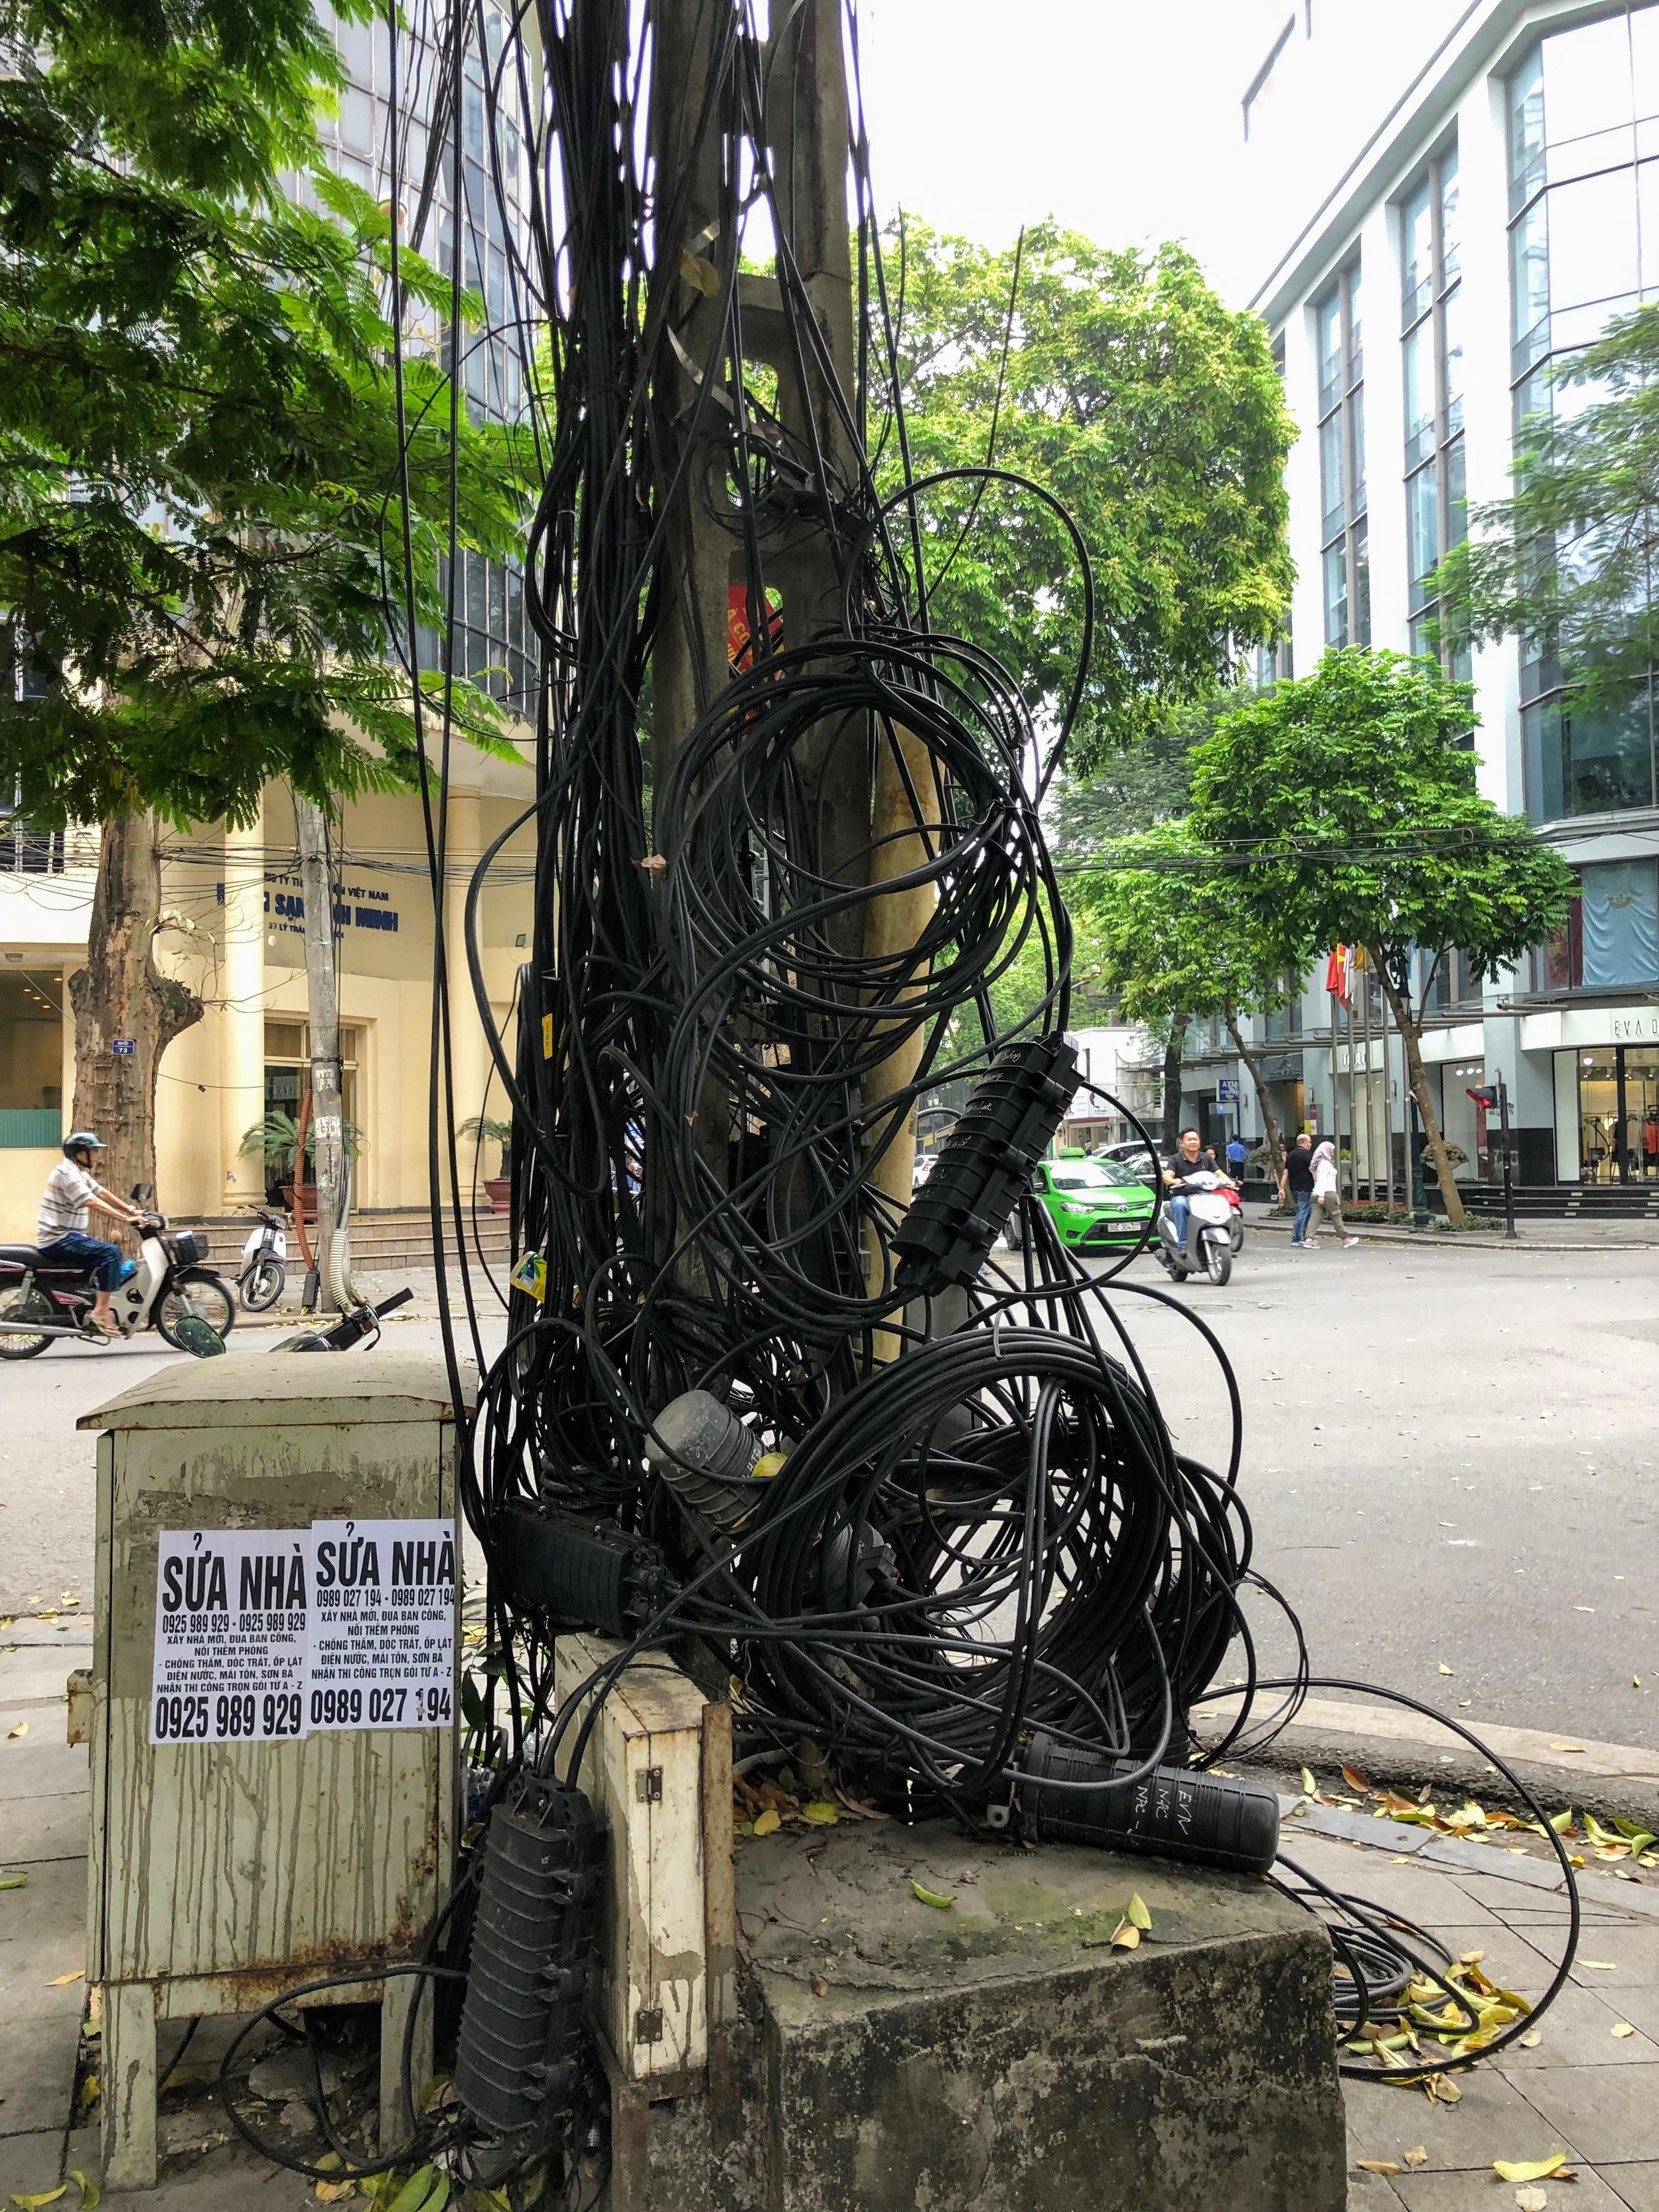  Power seems to work just fine in Hanoi. How? I have no idea. 